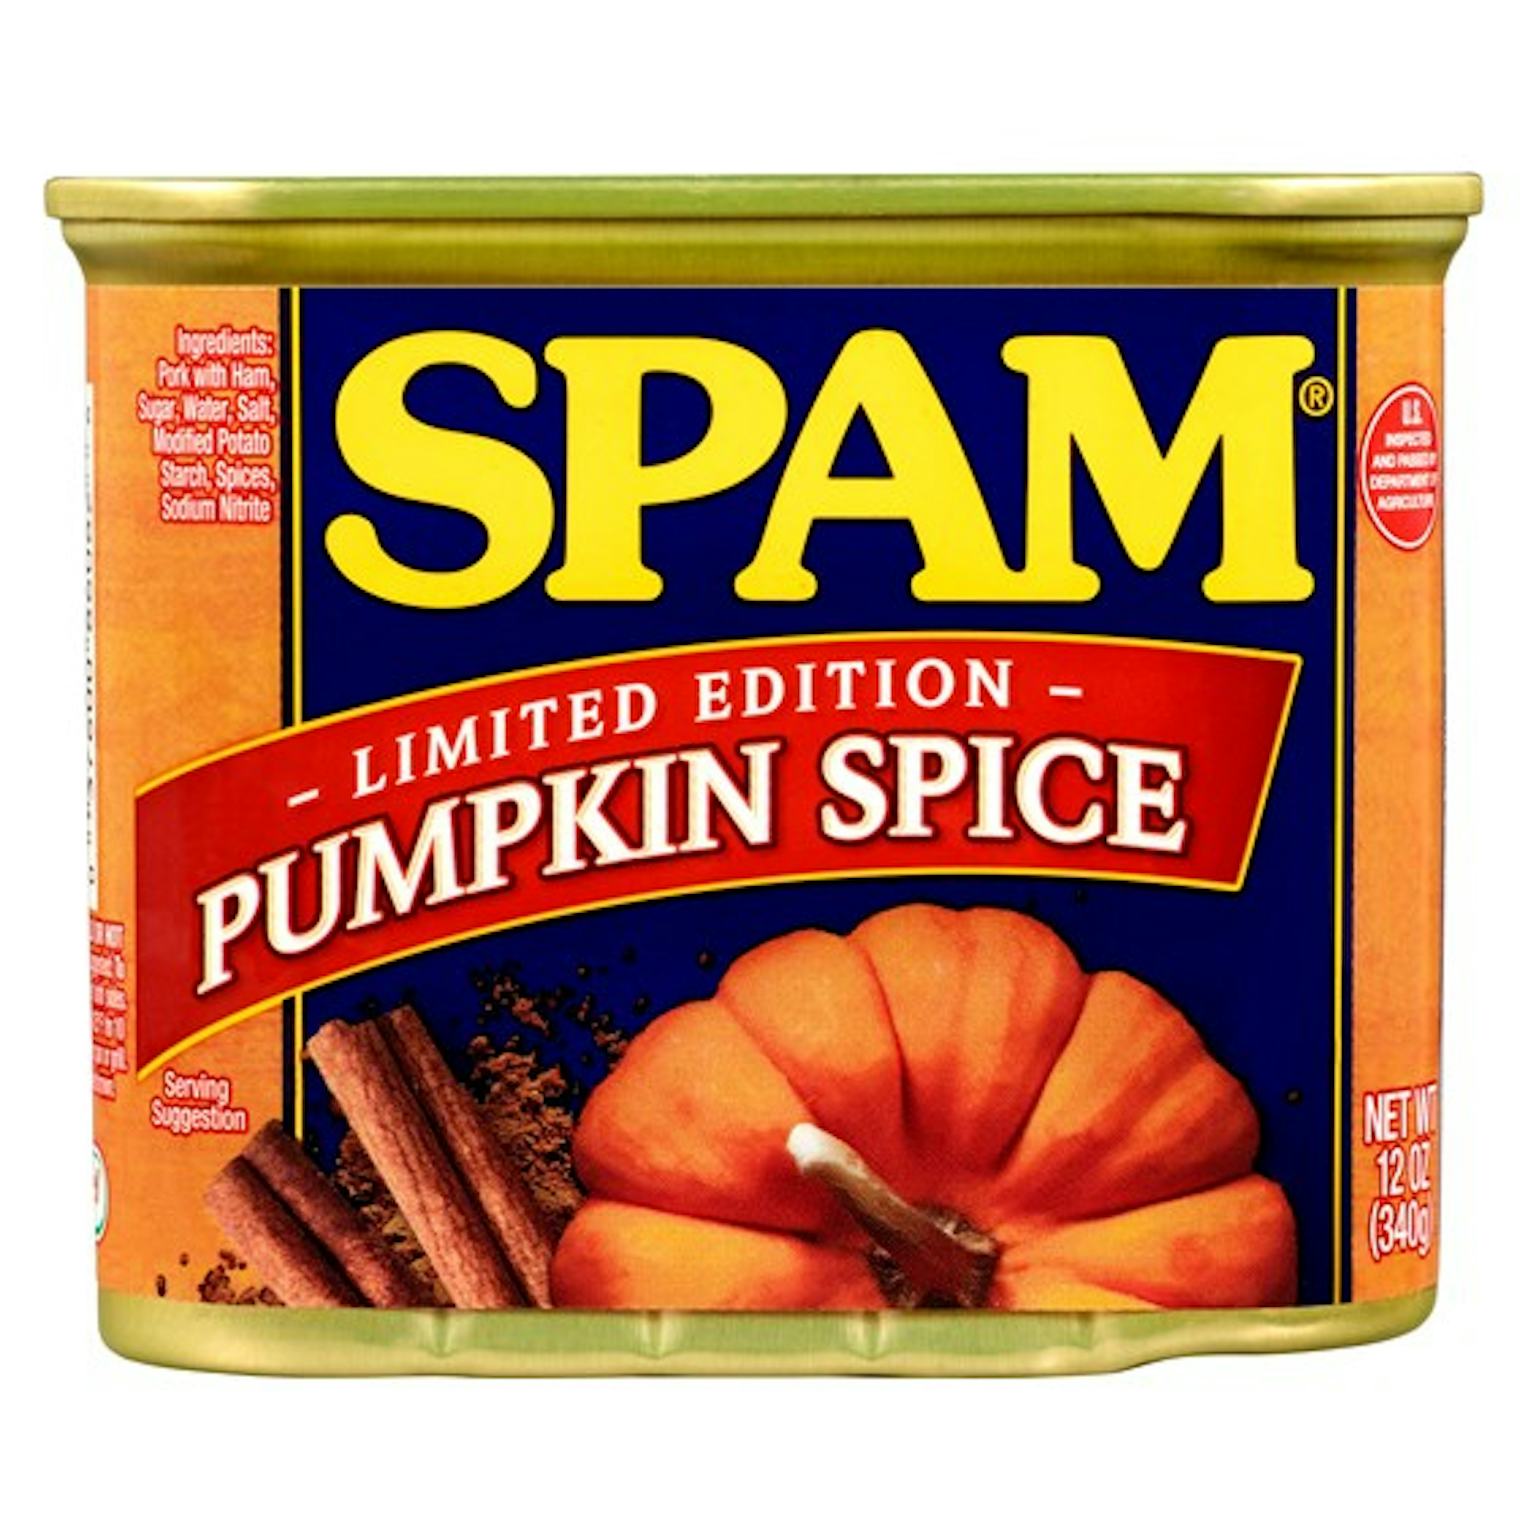 How To Get Pumpkin Spice Spam For Its 2019 Limited Edition Run